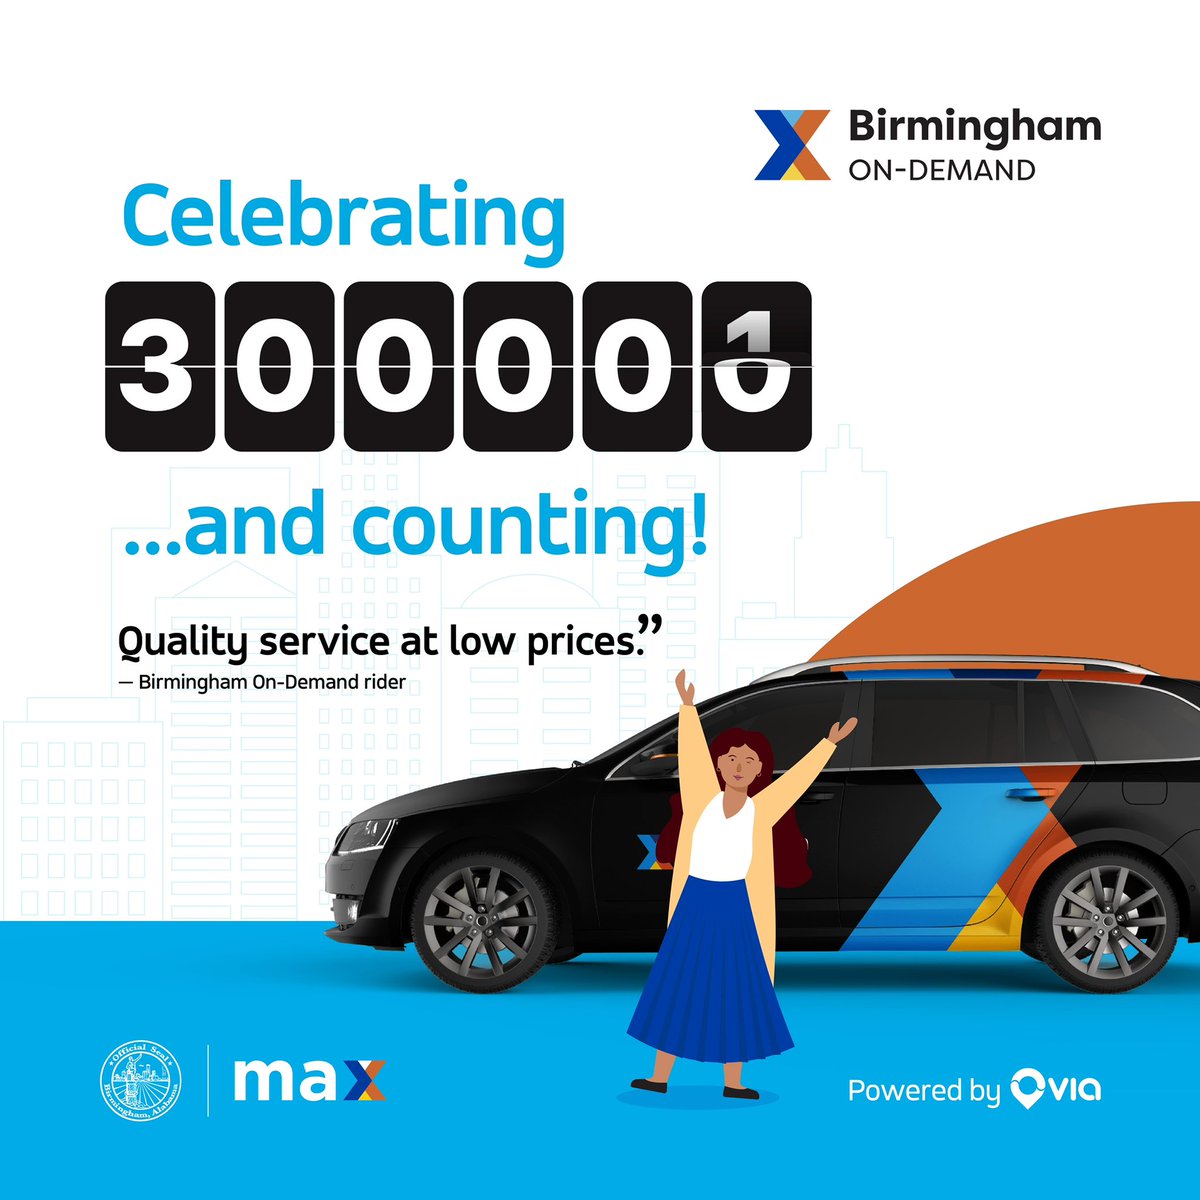 300,000 and counting! Thank you, Birmingham, for helping On-Demand reach this incredible milestone. And there's miles more to go. Book a ride by calling 205-236-0768 or by downloading the Birmingham On-Demand app.